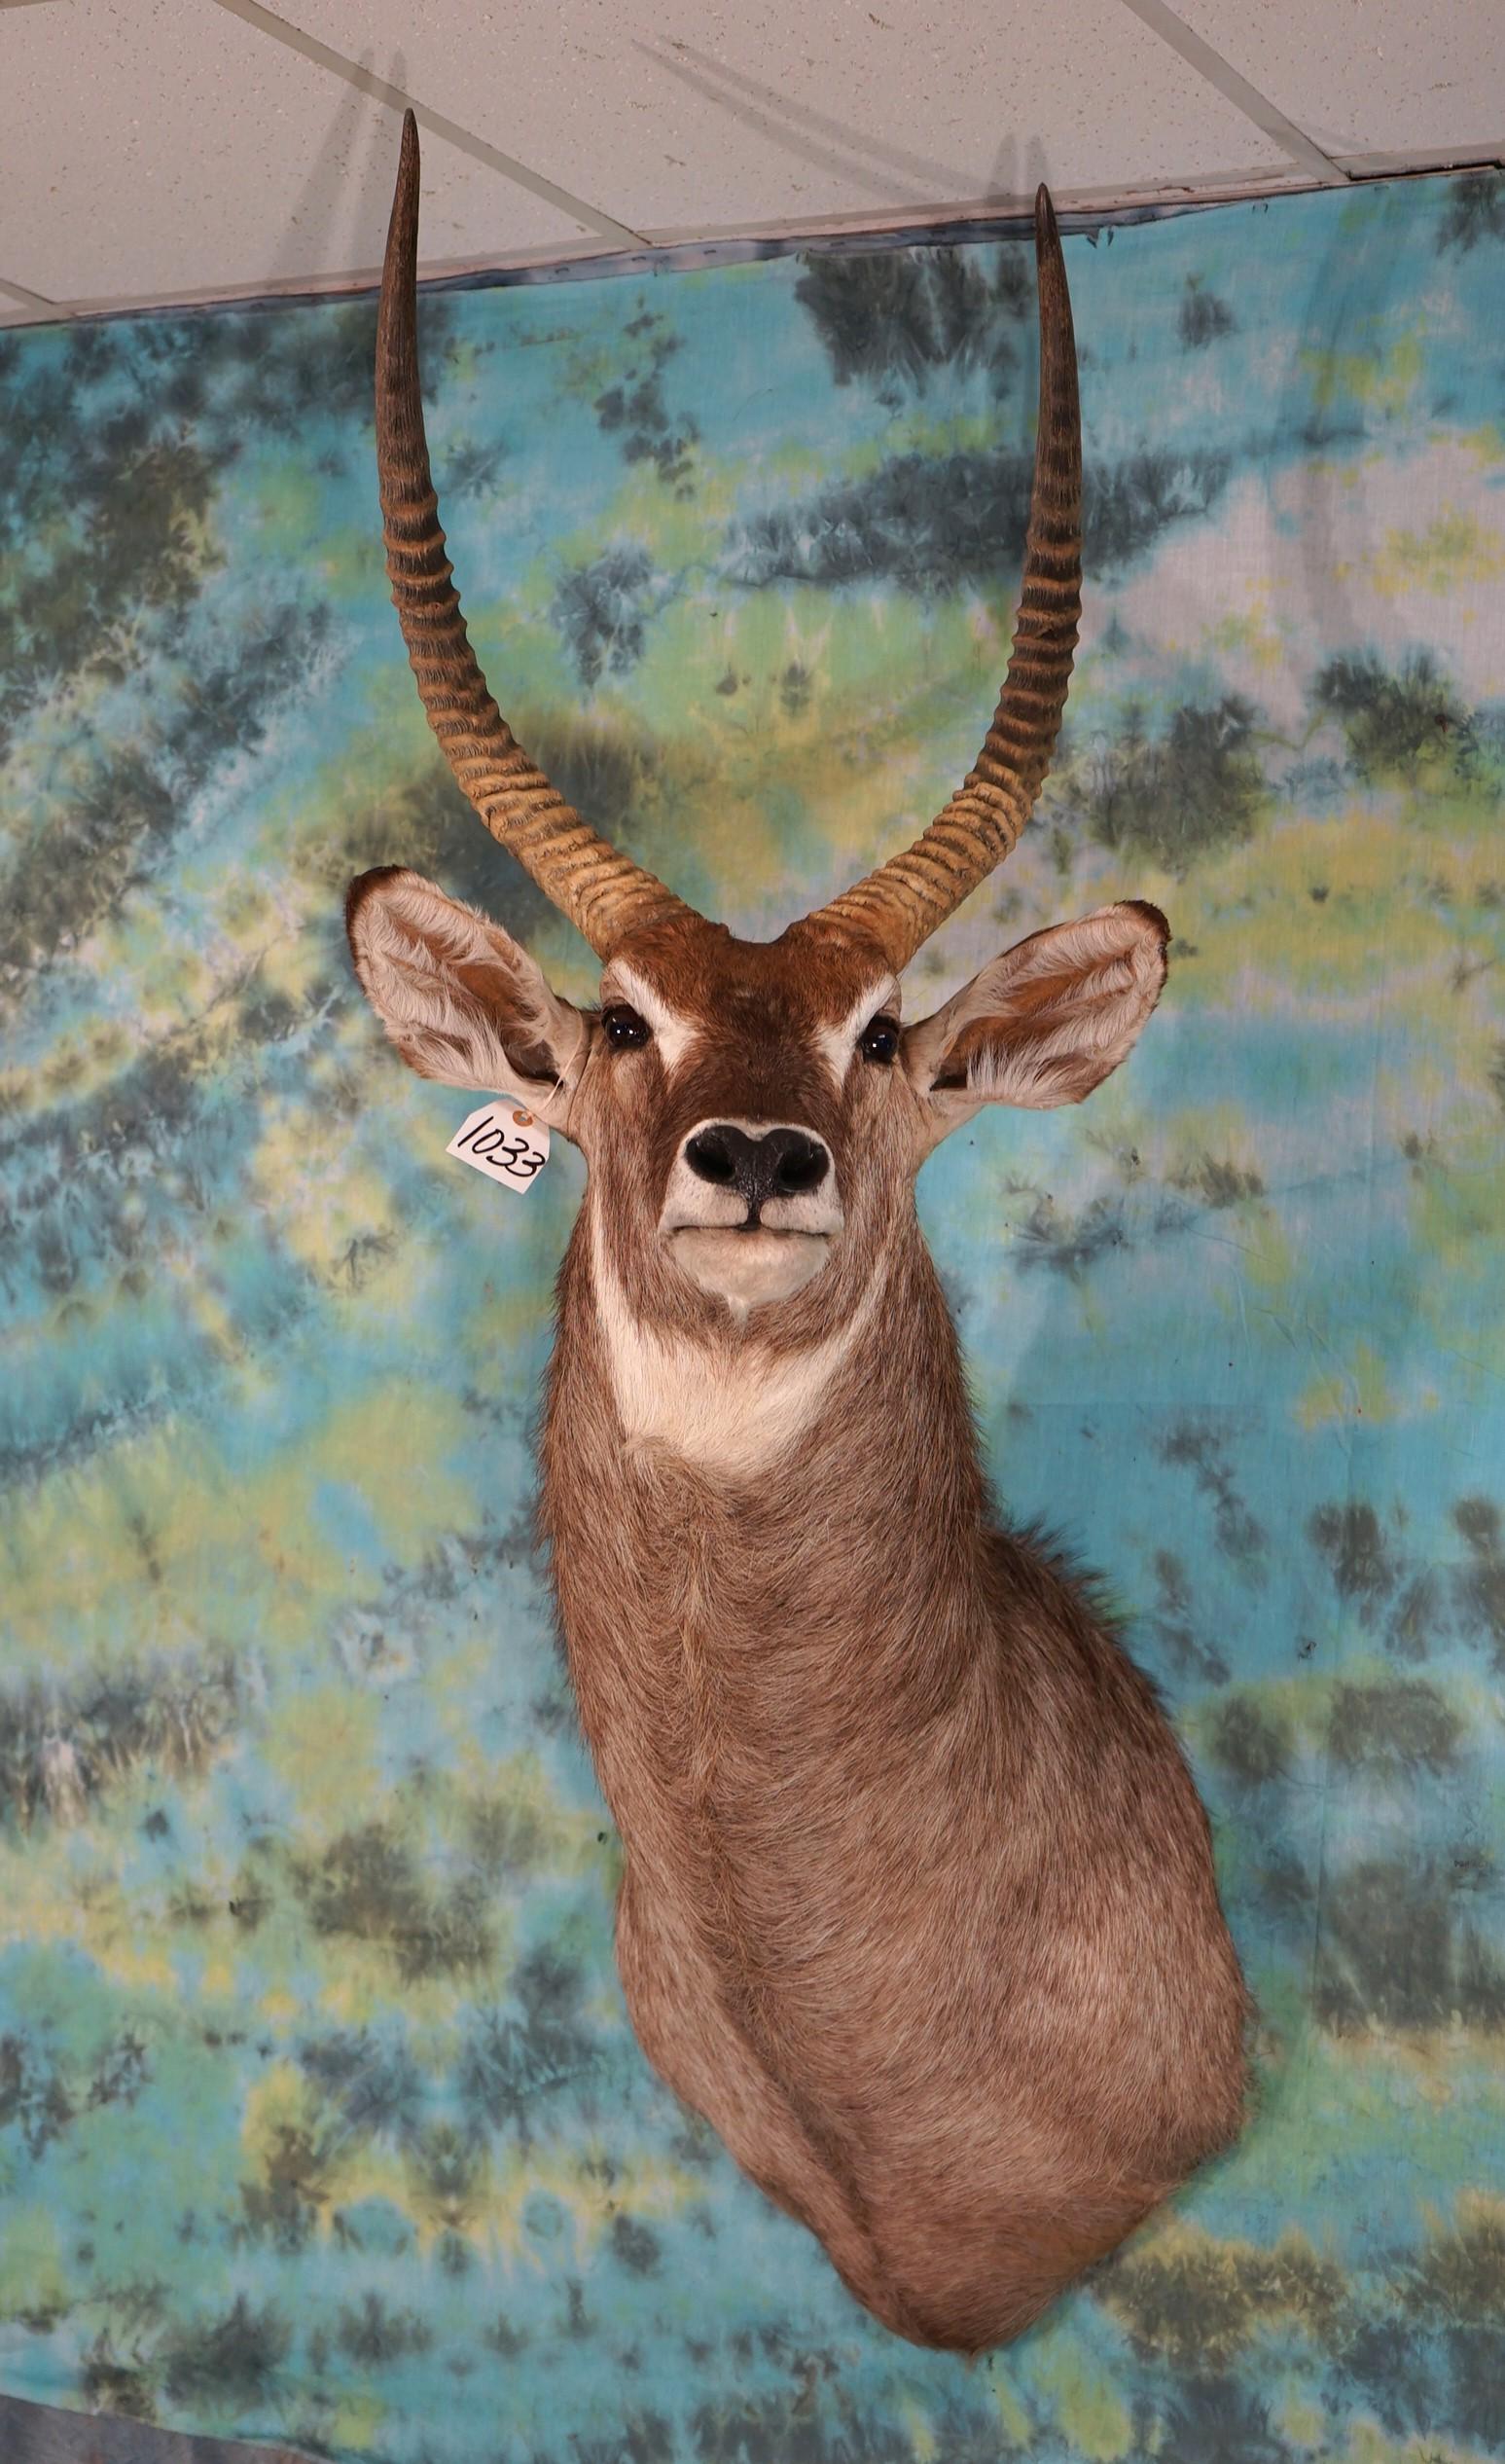 African Common Waterbuck Shoulder Taxidermy Mount